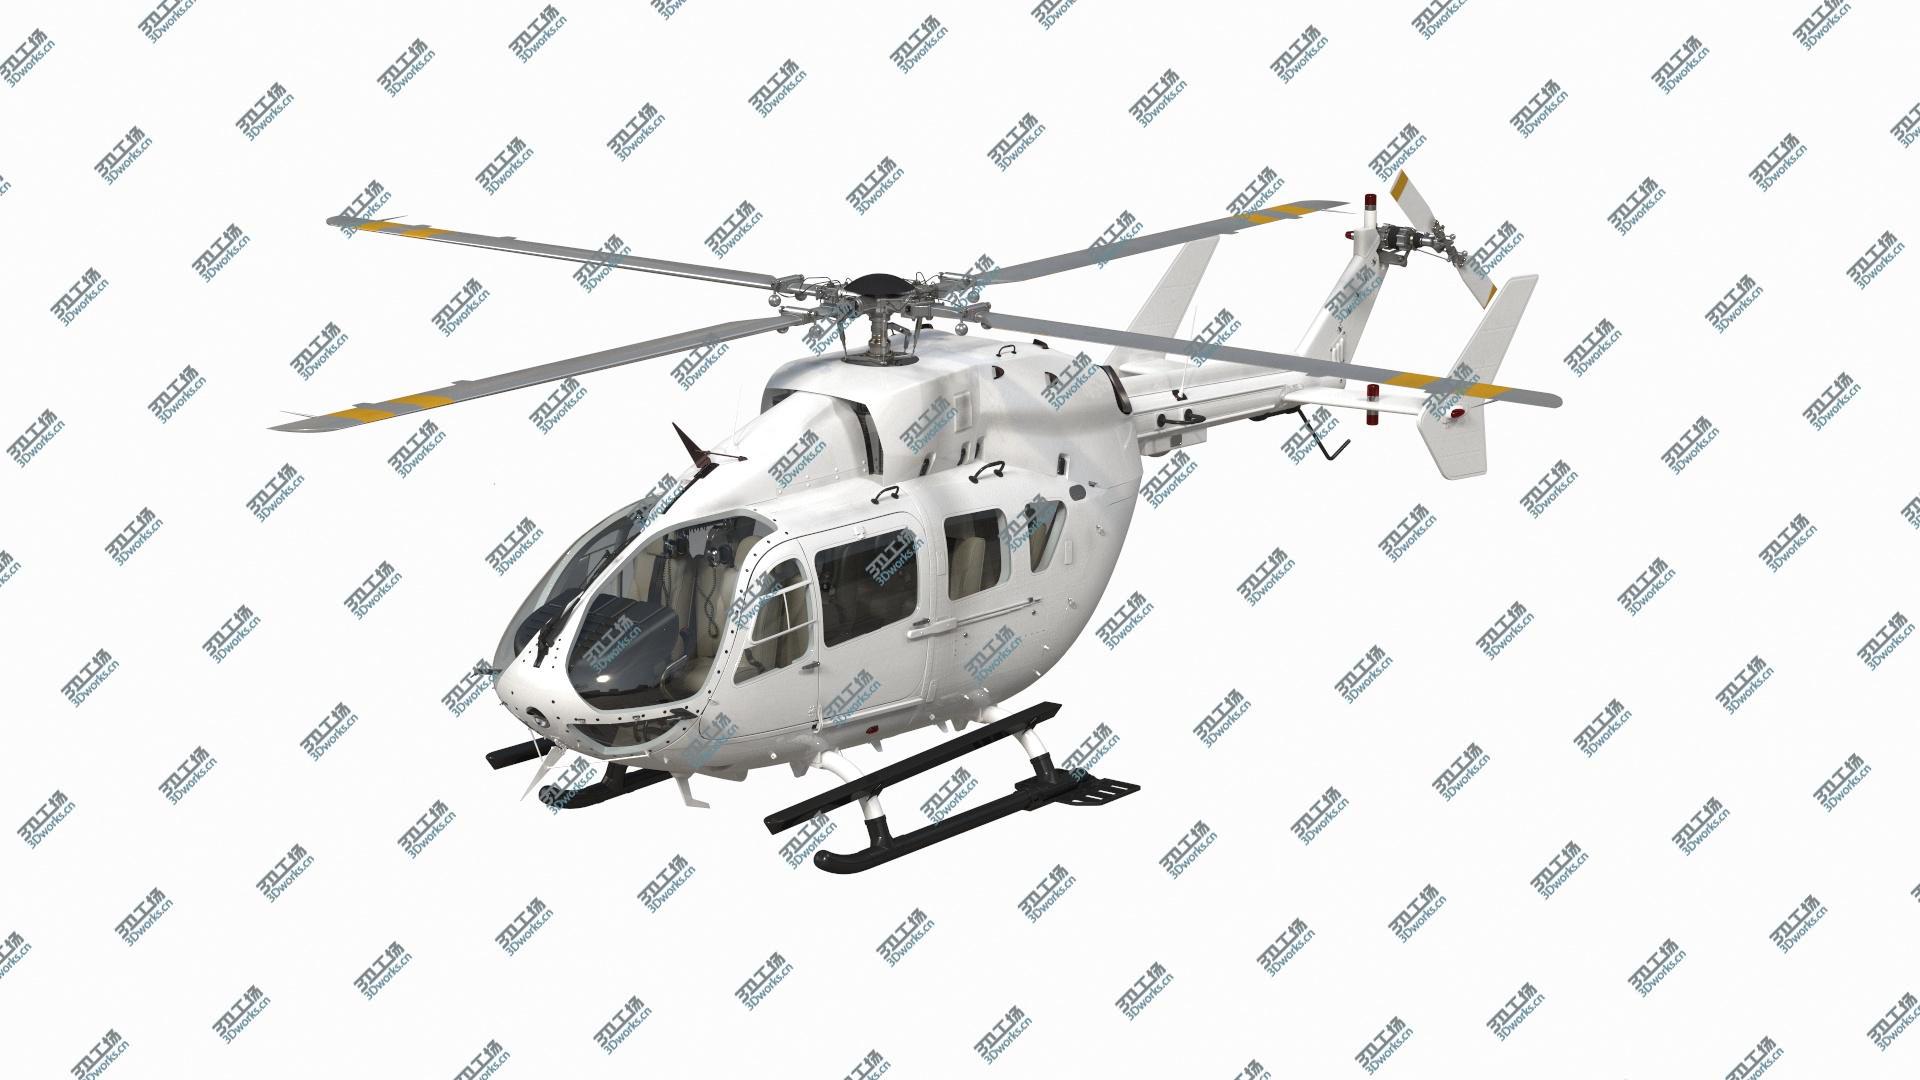 images/goods_img/20210319/3D Twin Engine Light Utility Helicopter/2.jpg